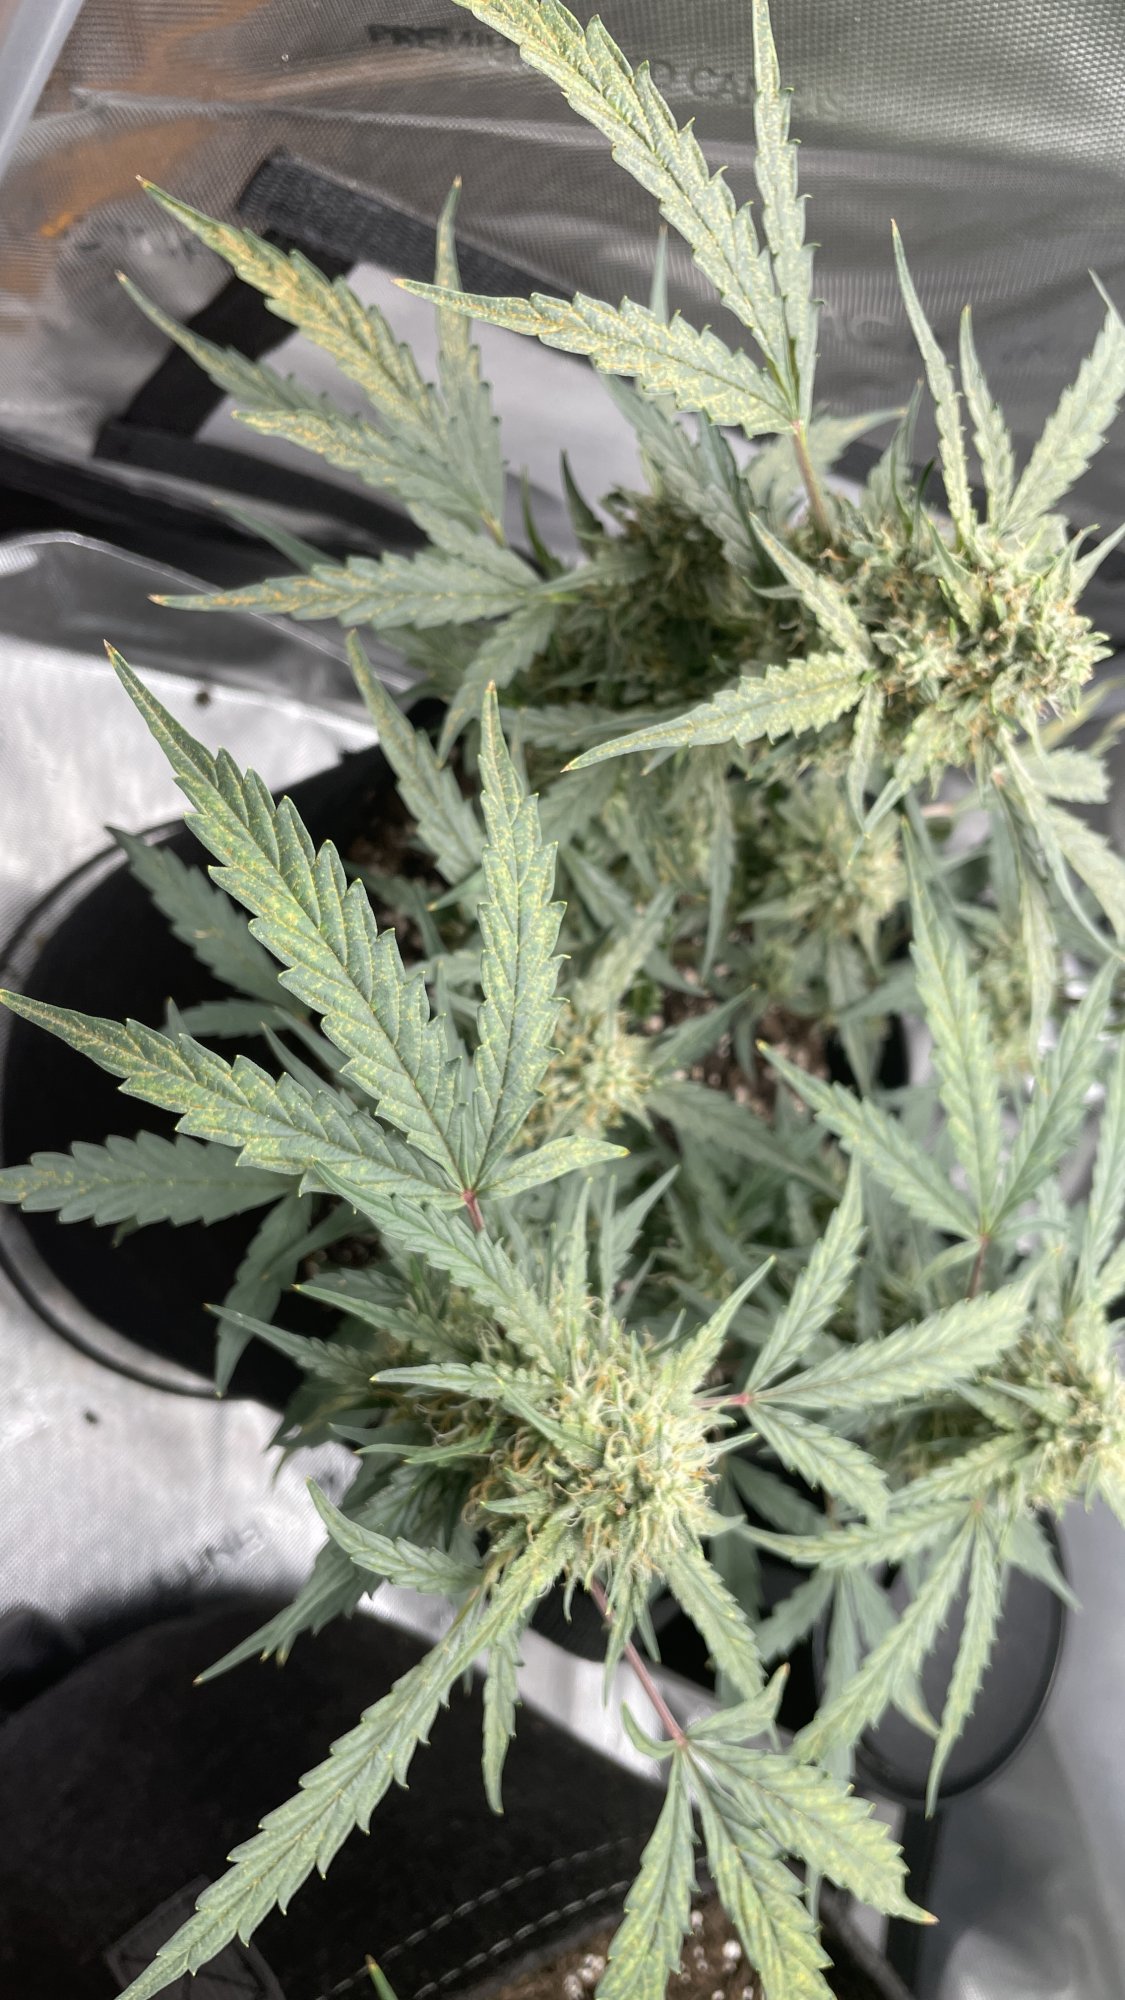 Problems with autoflower during flowering